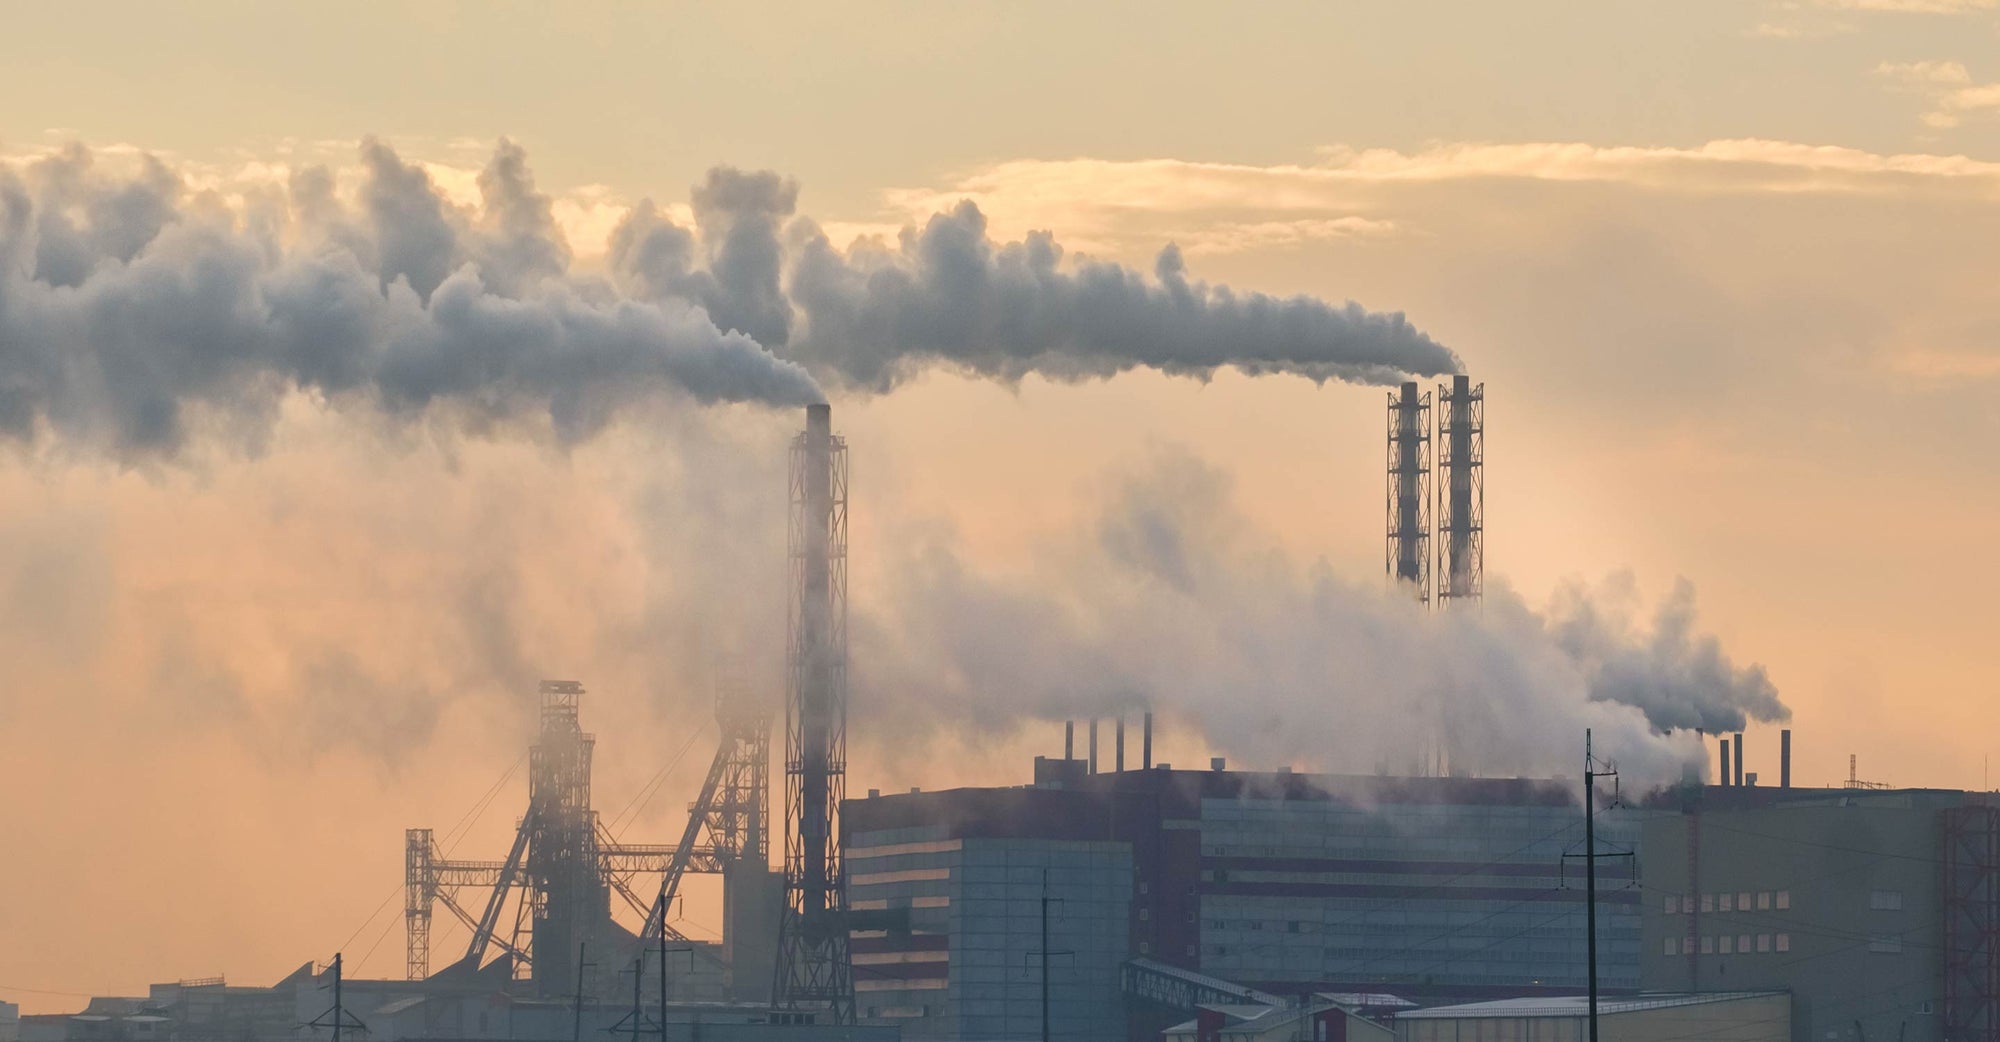 Production facility emitting pollution from smokestacks